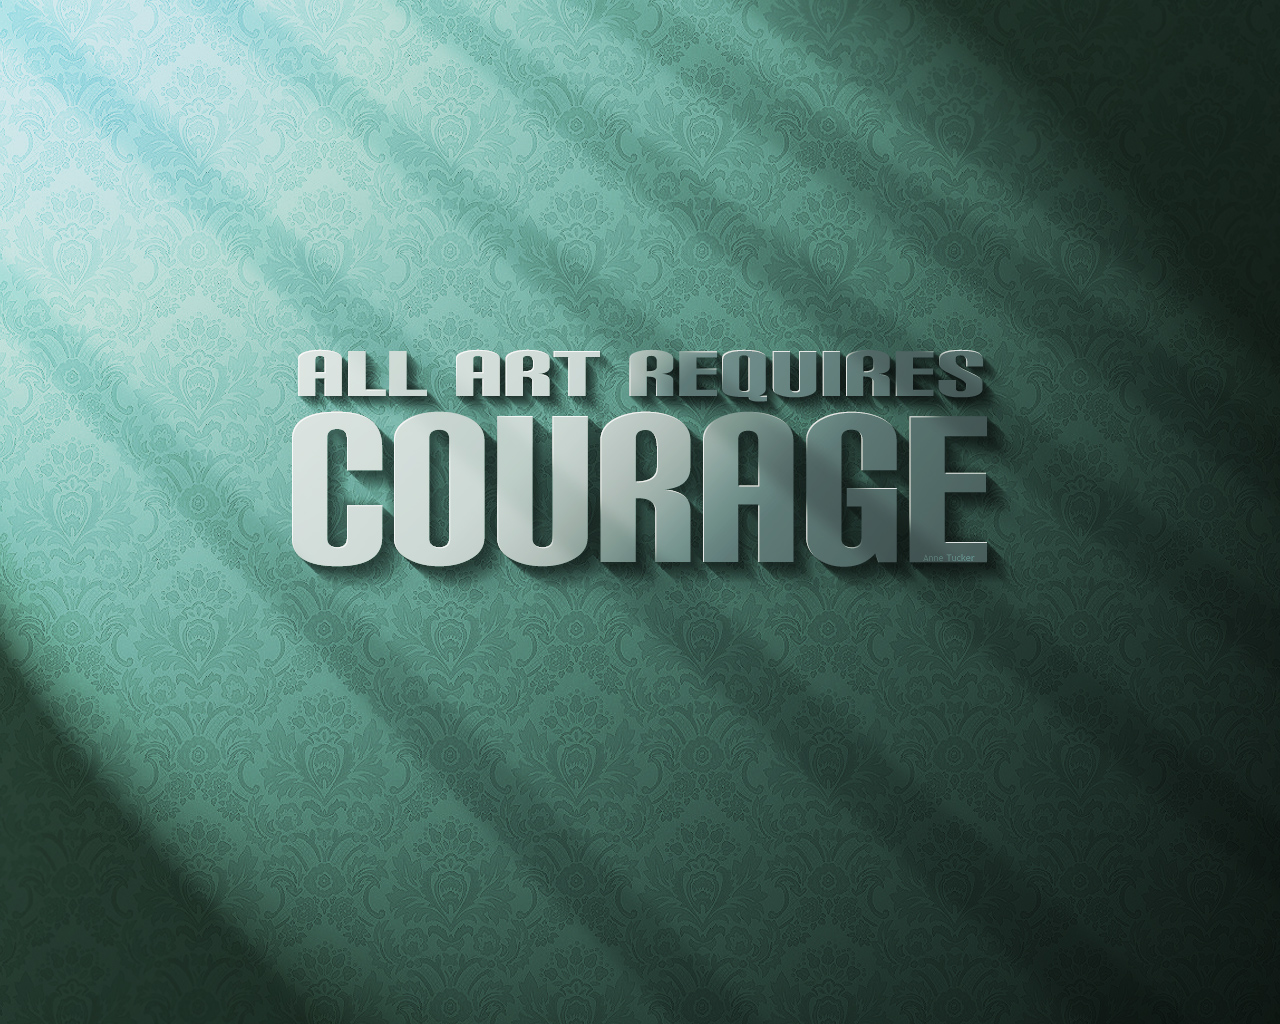 Courage Wallpaper Pack by Jamaal10 on DeviantArt